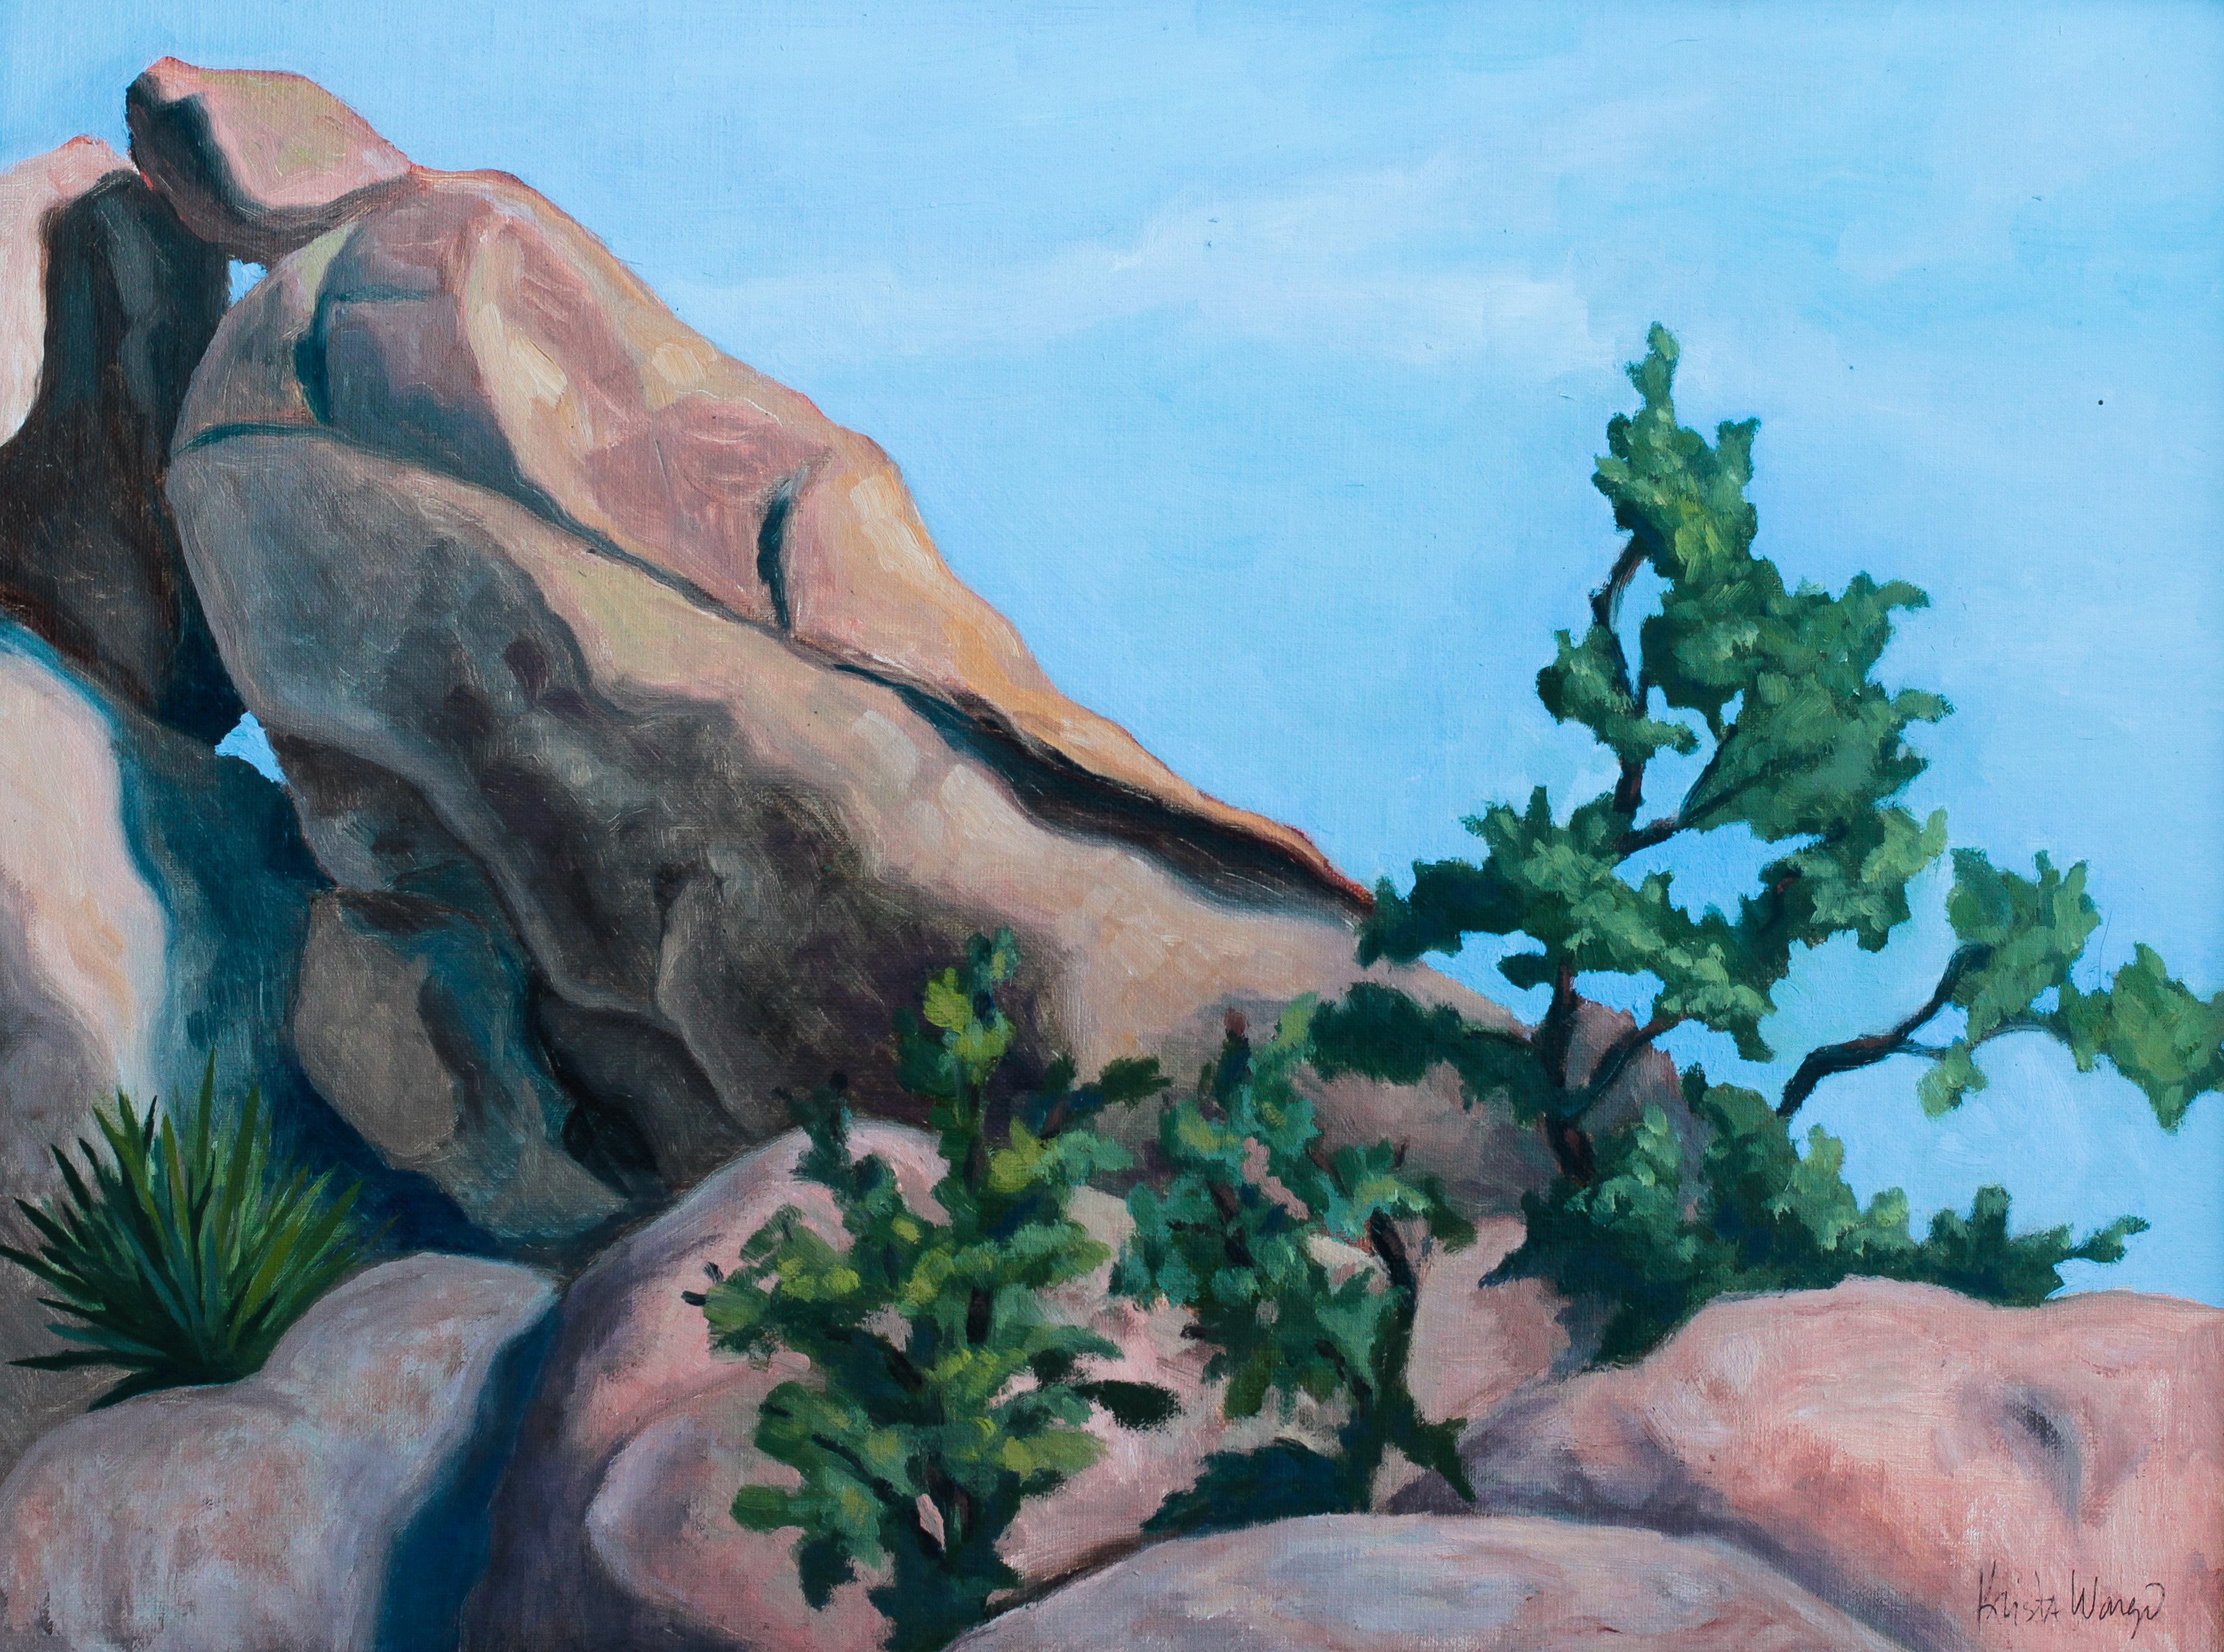 10 Best Sites for Plein Air Painting in Joshua Tree National Park